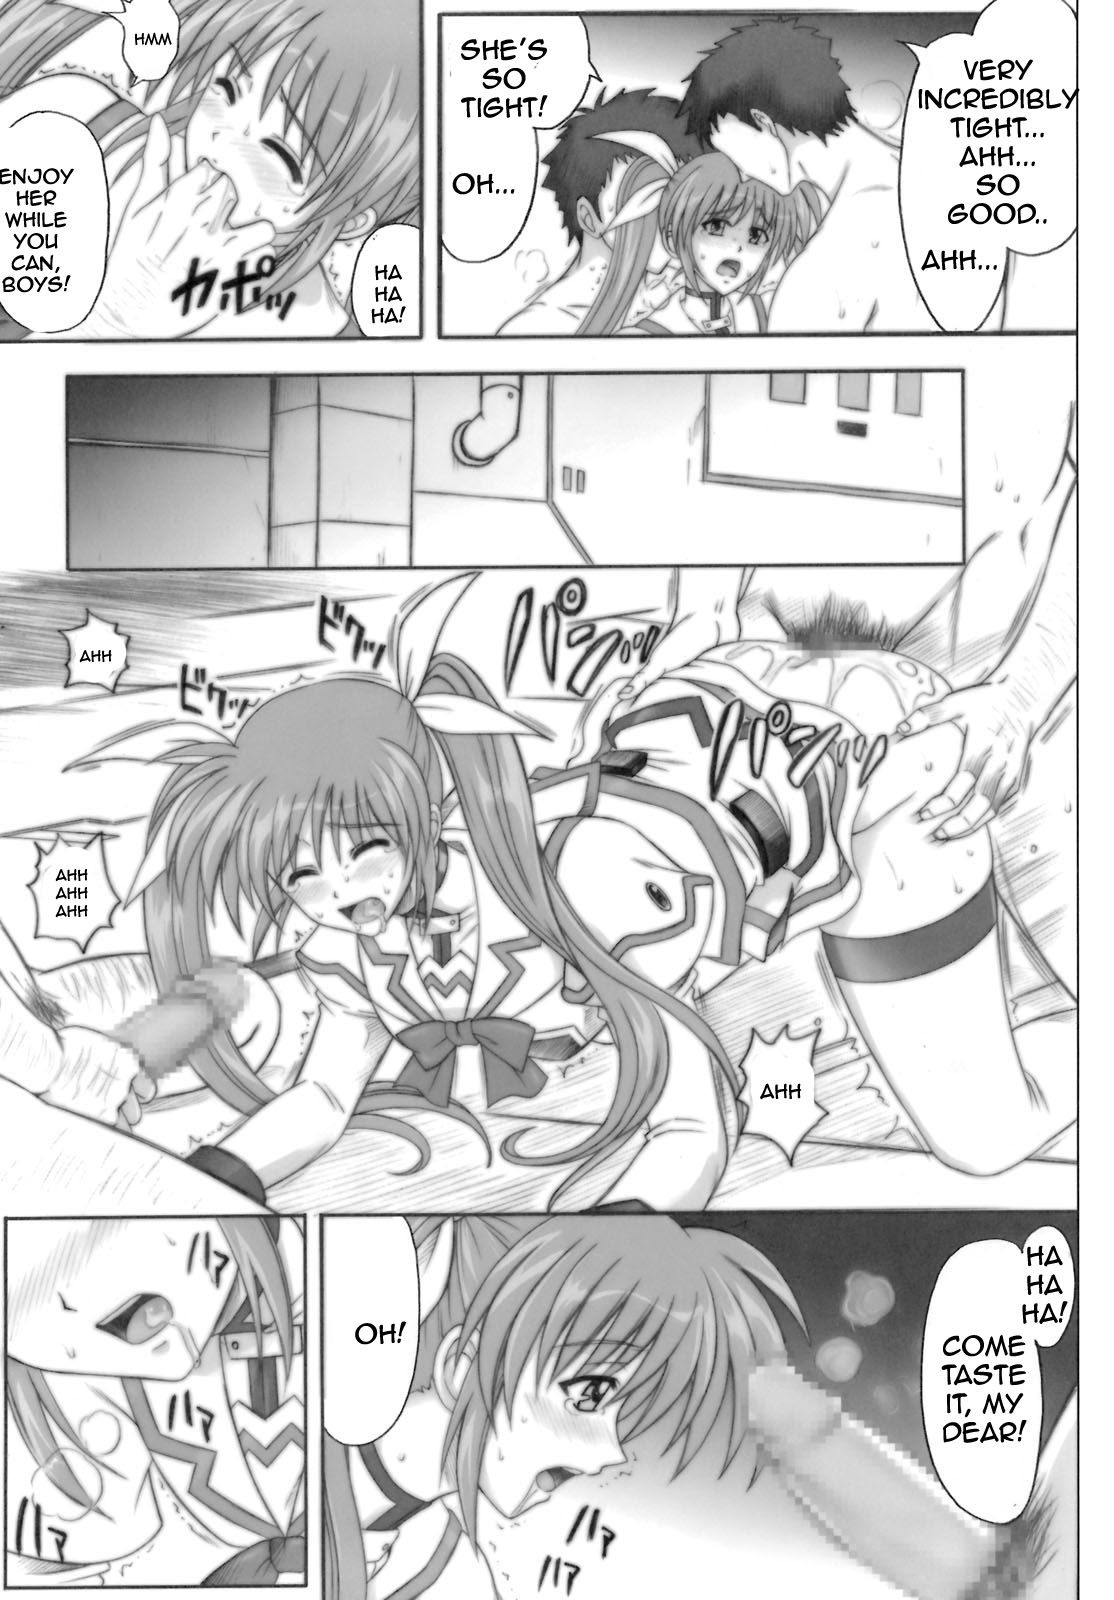 840 Color Classic Situation Note Extention (Mahou Shoujo Lyrical Nanoha) [English] [Rewrite] page 38 full